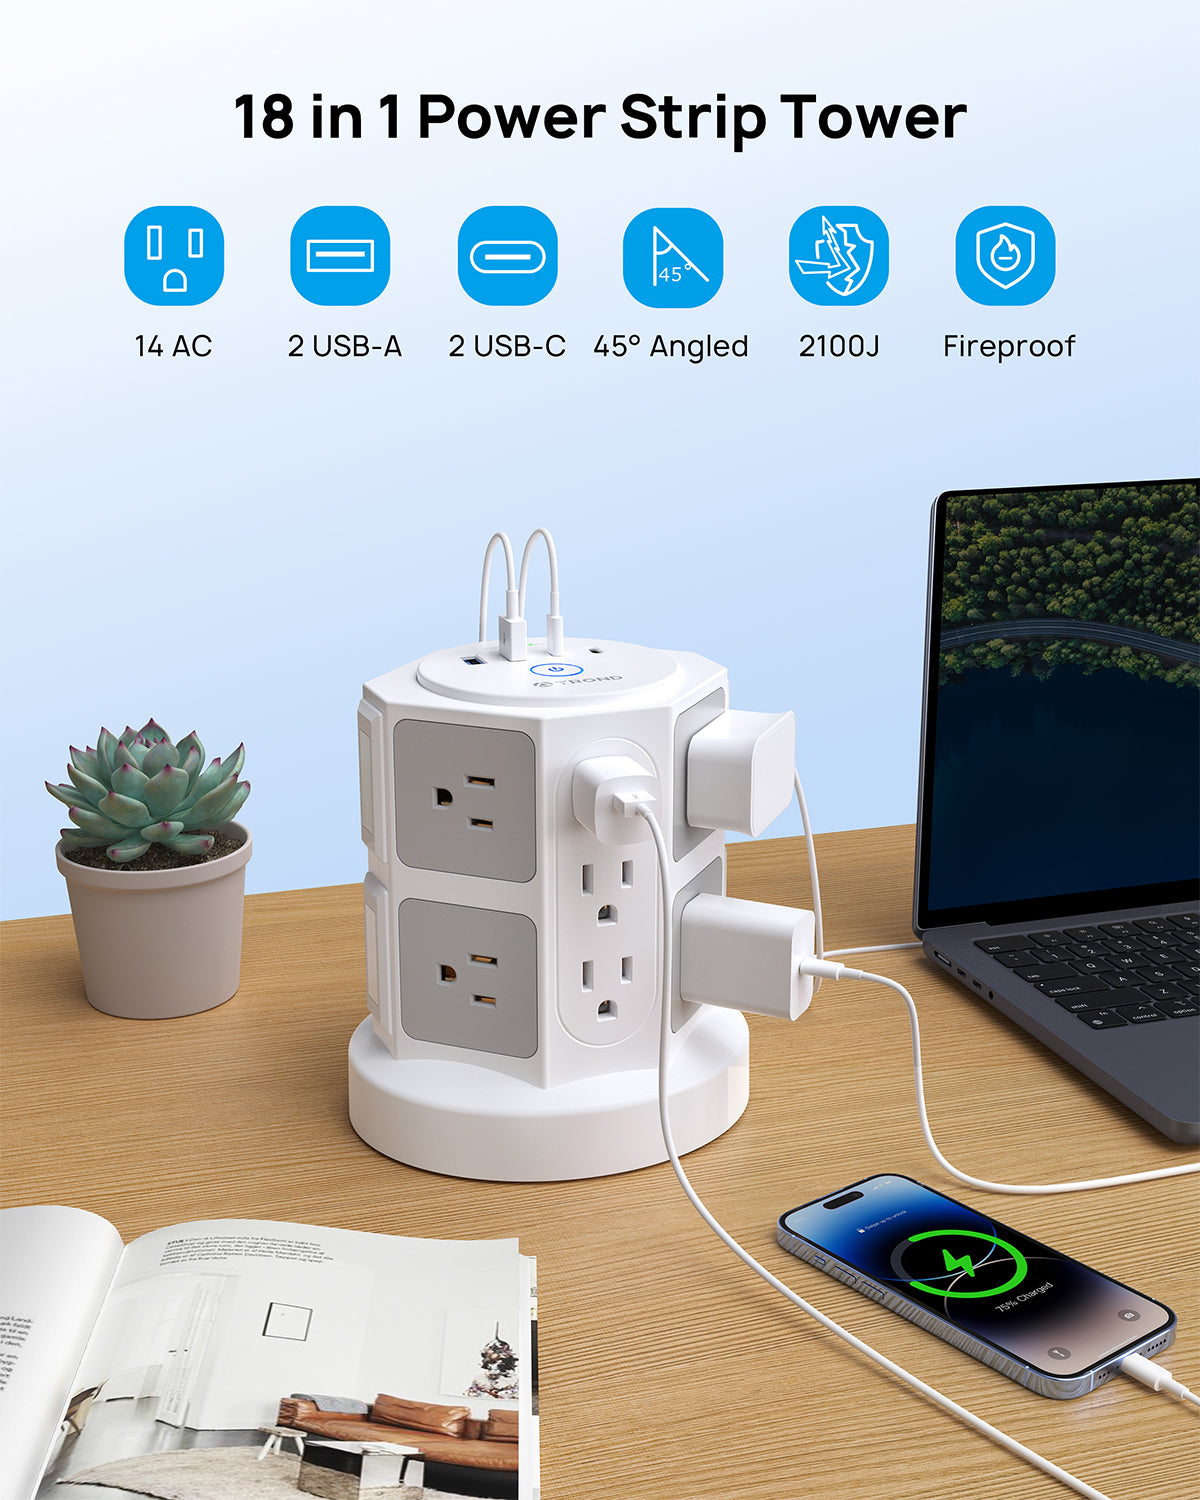 Surge Protector Power Strip Tower - TROND Power Strip with 4 USB Ports